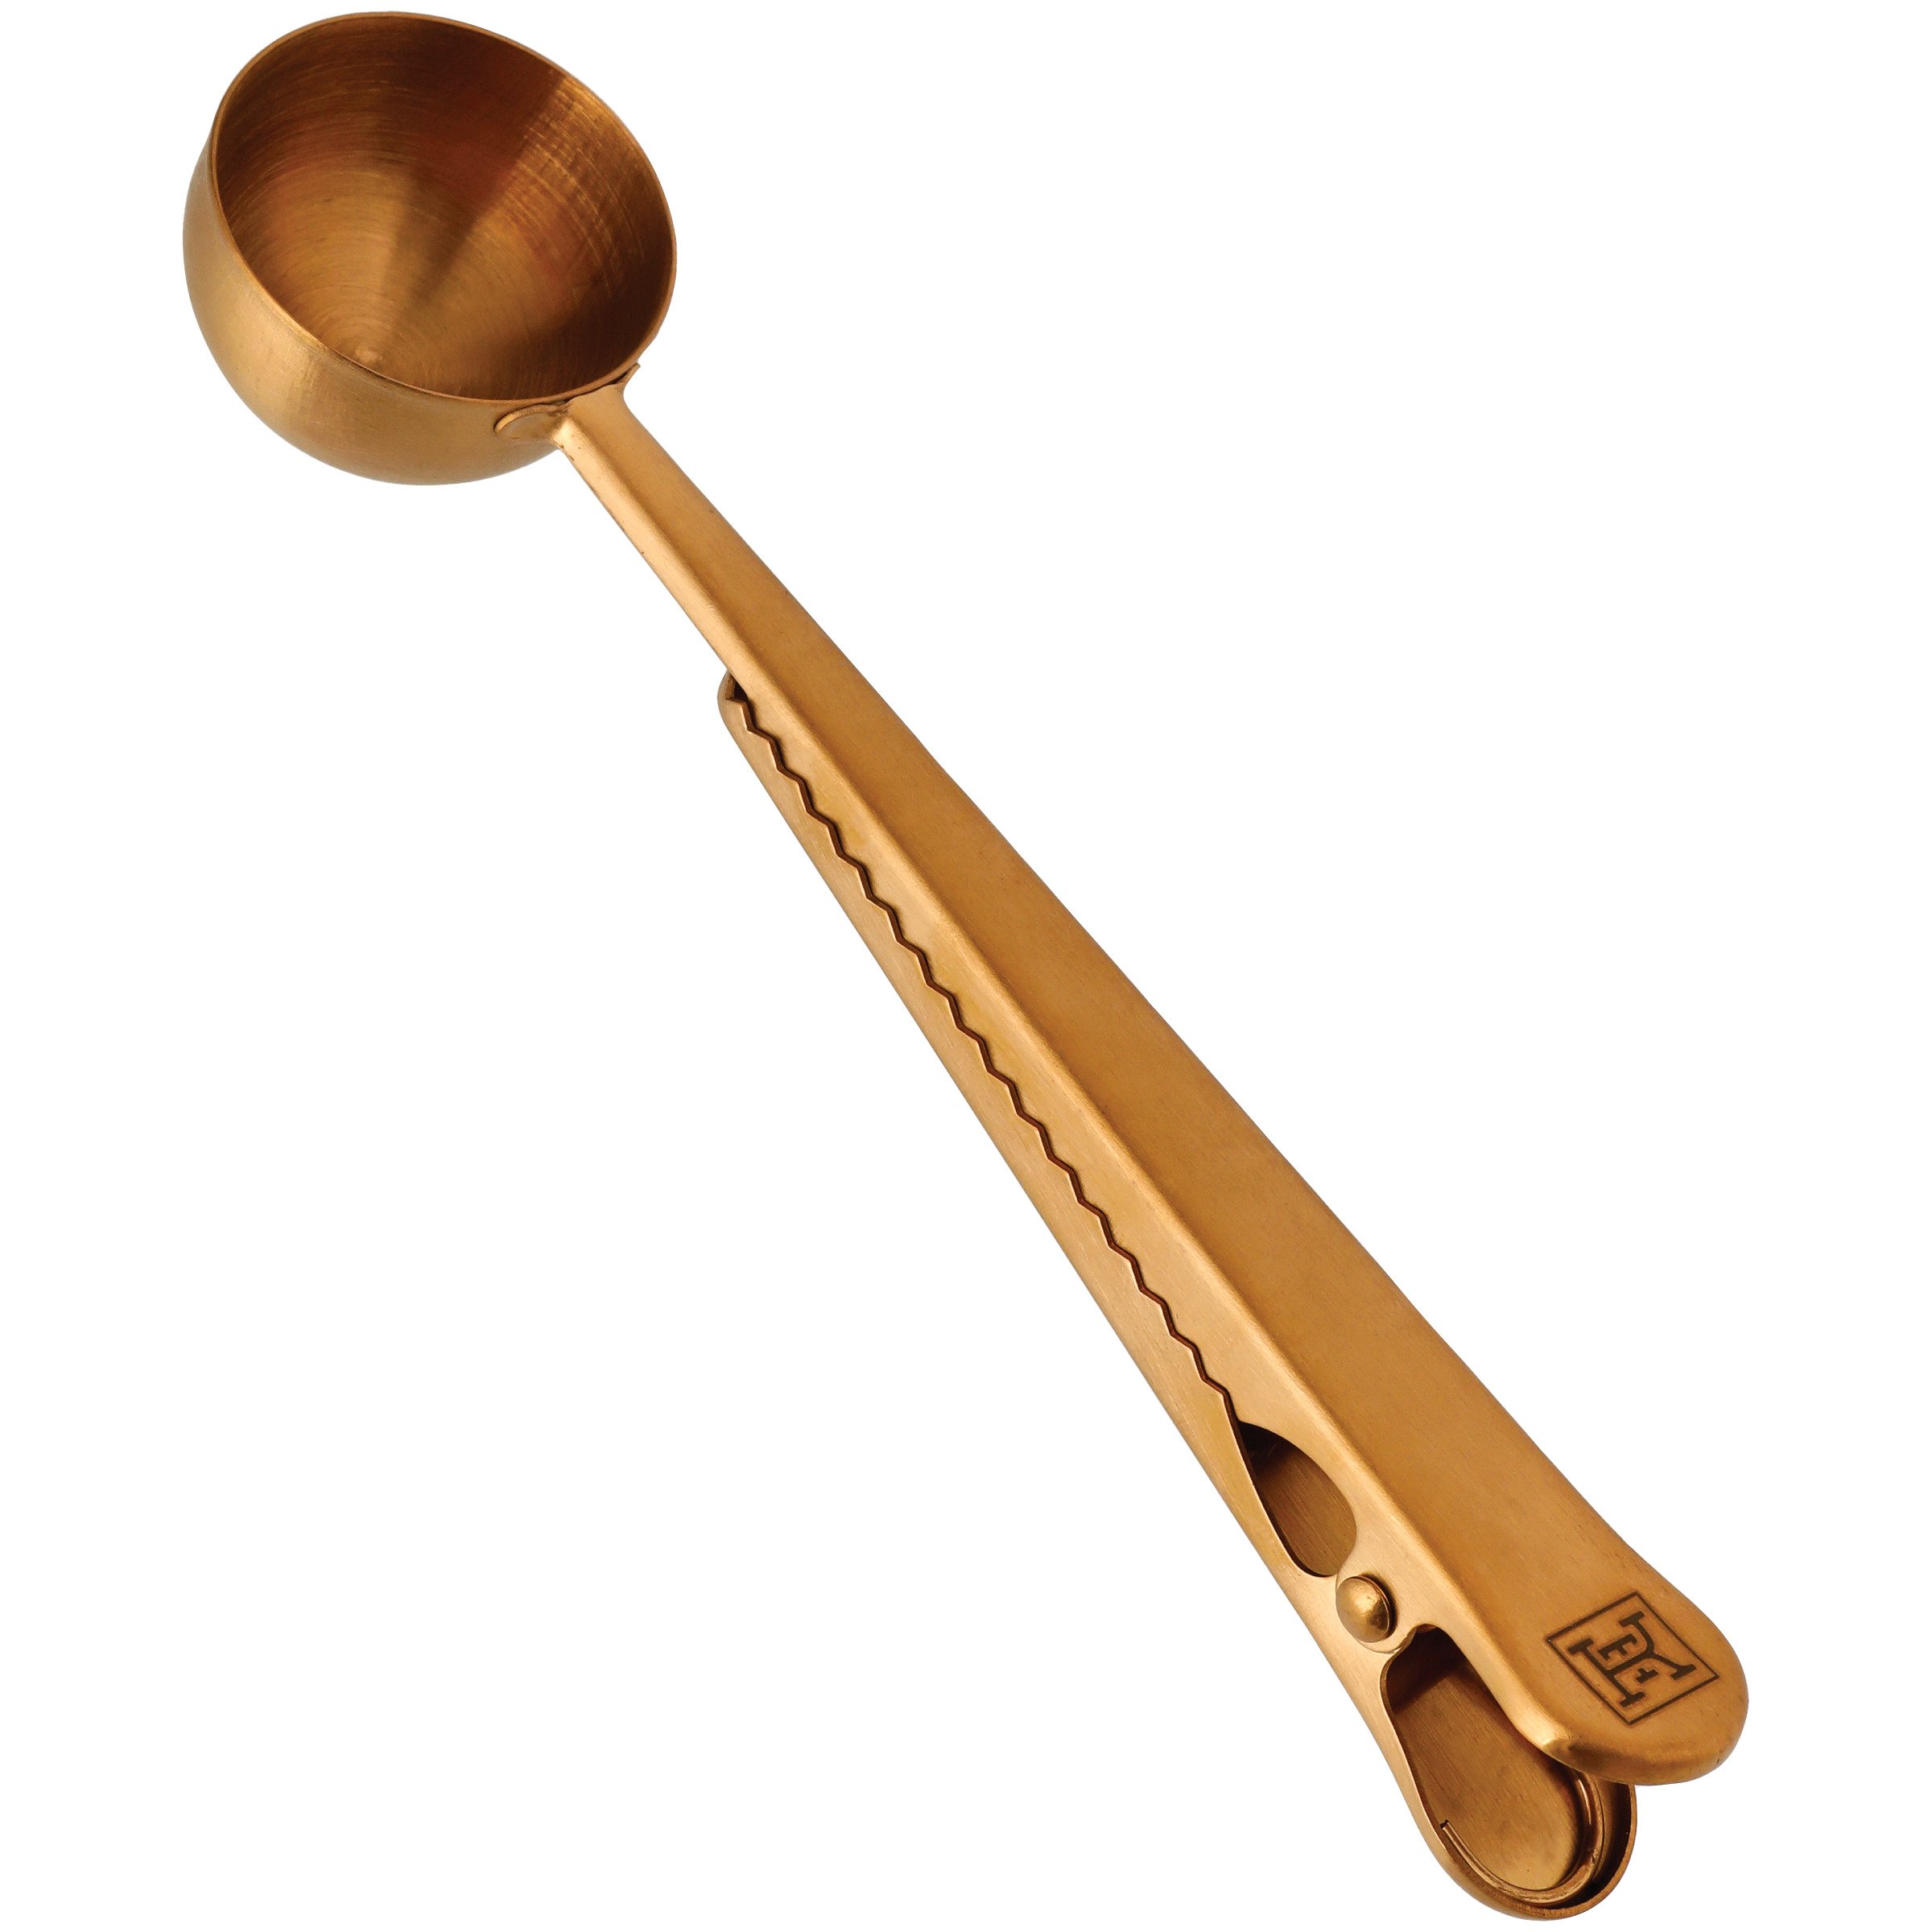 Kitchen & Table by H-E-B Zinc Alloy Ice Cream Scoop - Shop Utensils &  Gadgets at H-E-B